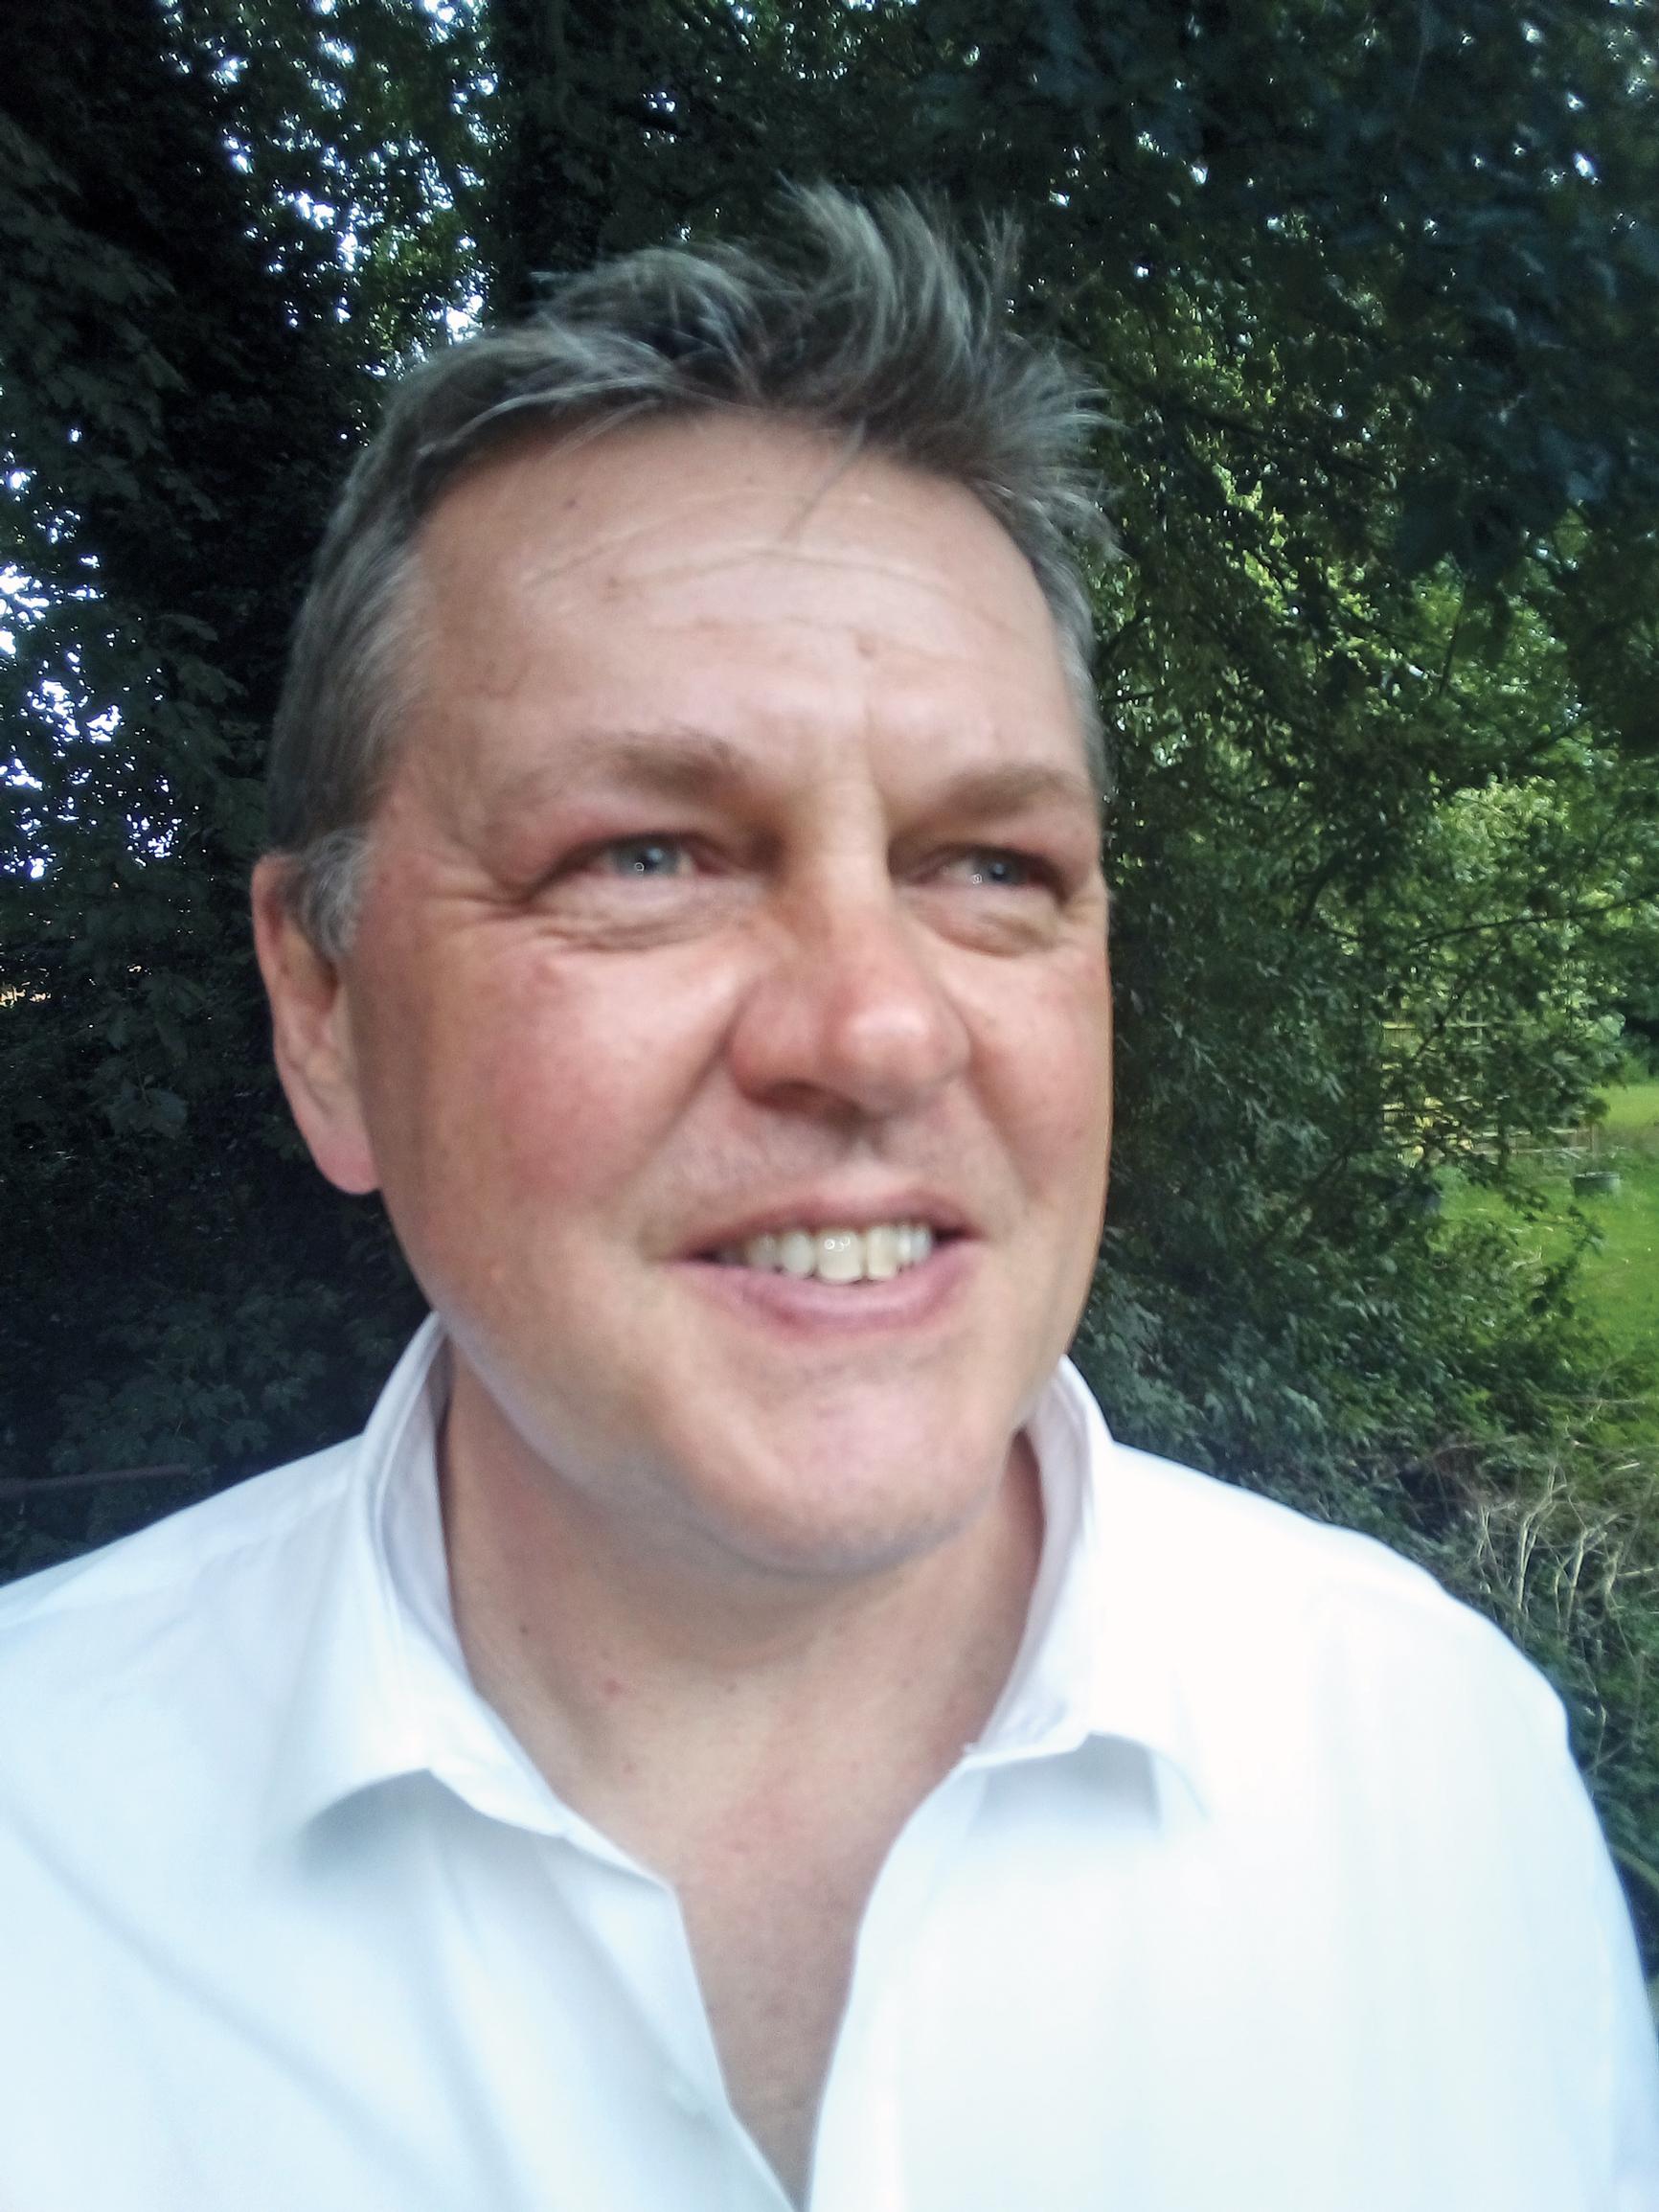 John Beard is account director for mobility technology provider Trapeze Group.